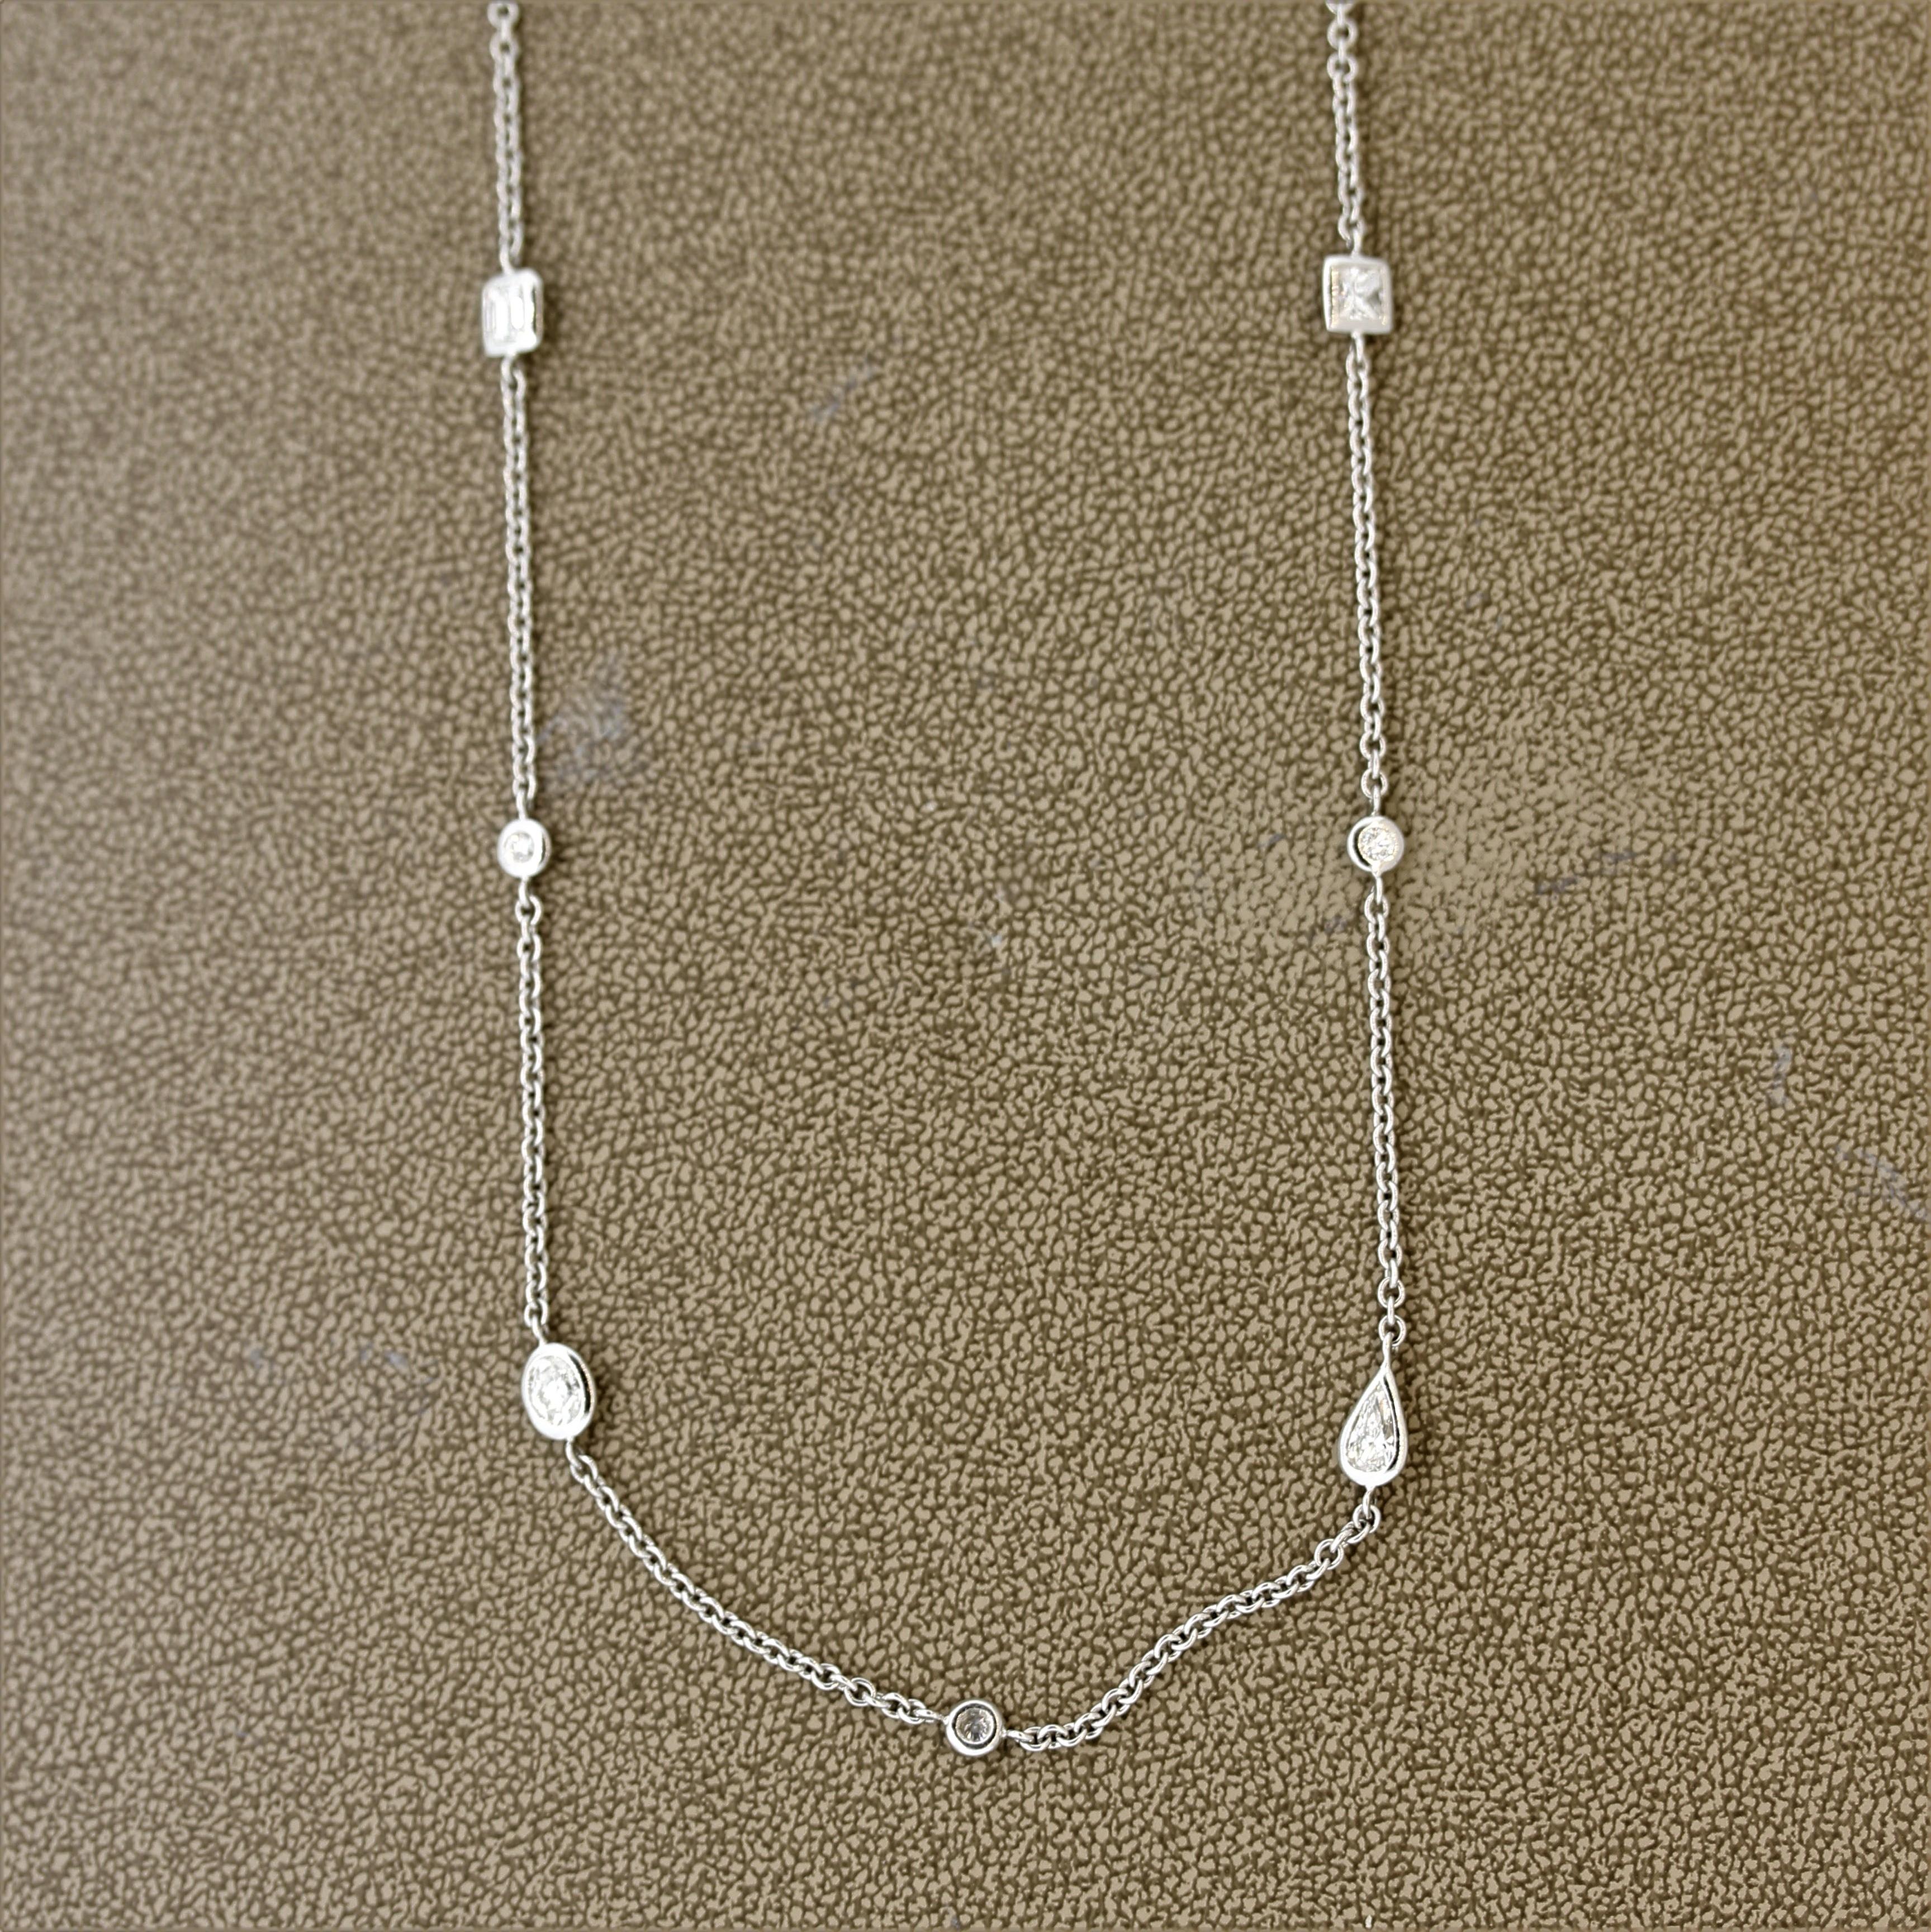 A unique styled “Diamonds by the Yard” necklace featuring large fancy cut diamonds! The 35-inch necklace features 21 individual diamonds, 11 of them being round brilliant cuts which are set between each larger fancy cut diamonds. The fancy shaped